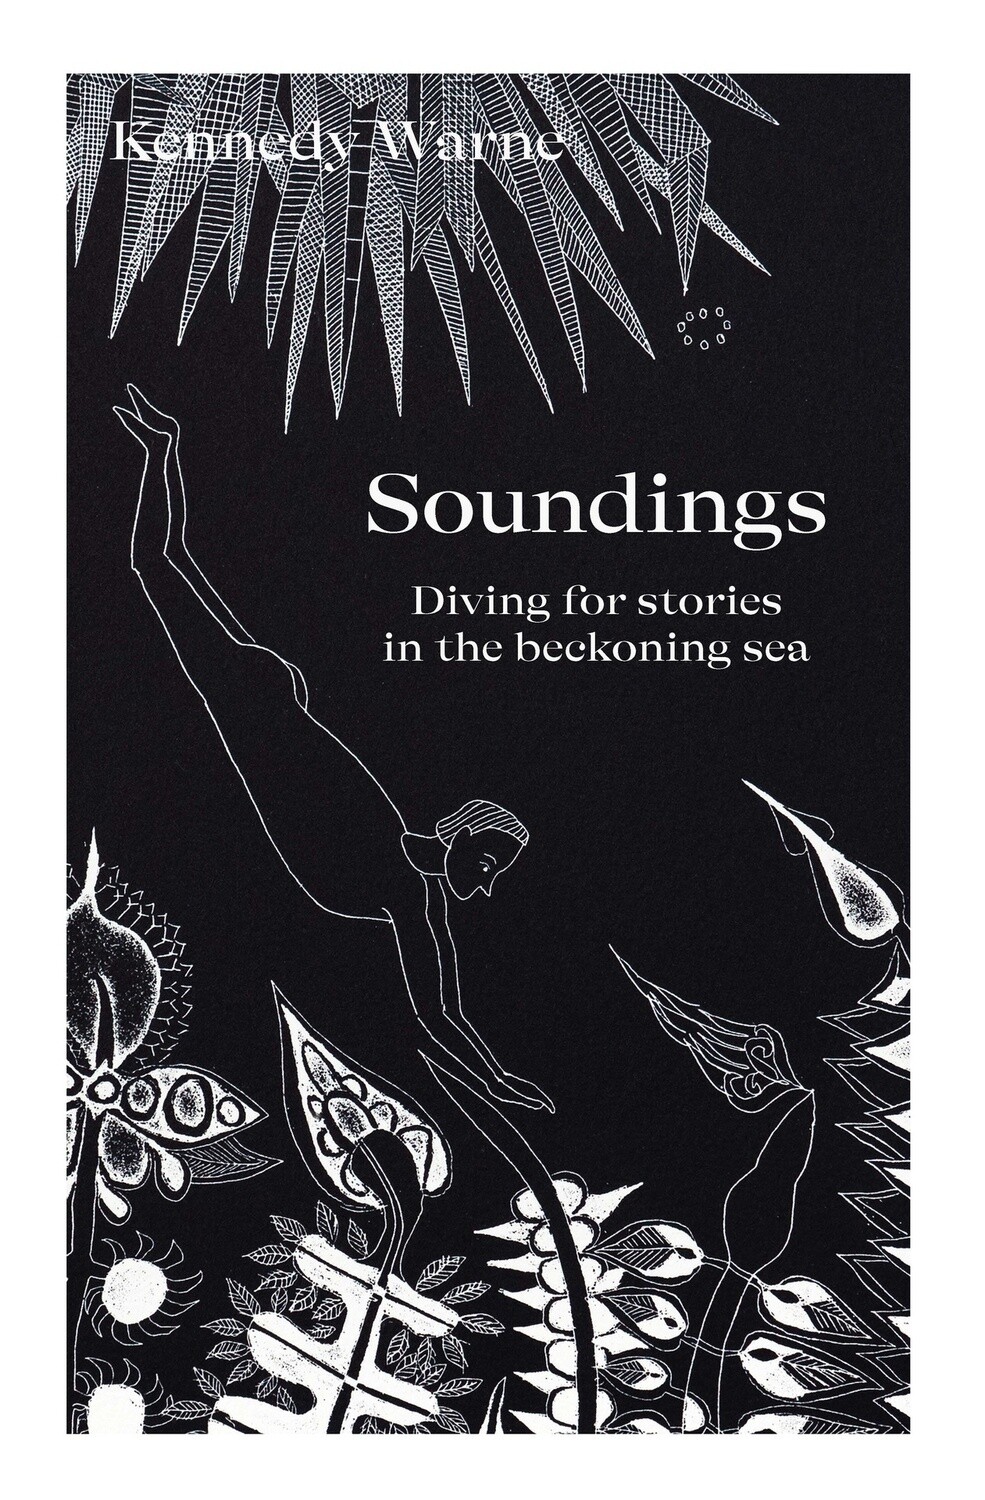 Soundings: Diving for Stories in the Beckoning Sea by Kennedy Warne